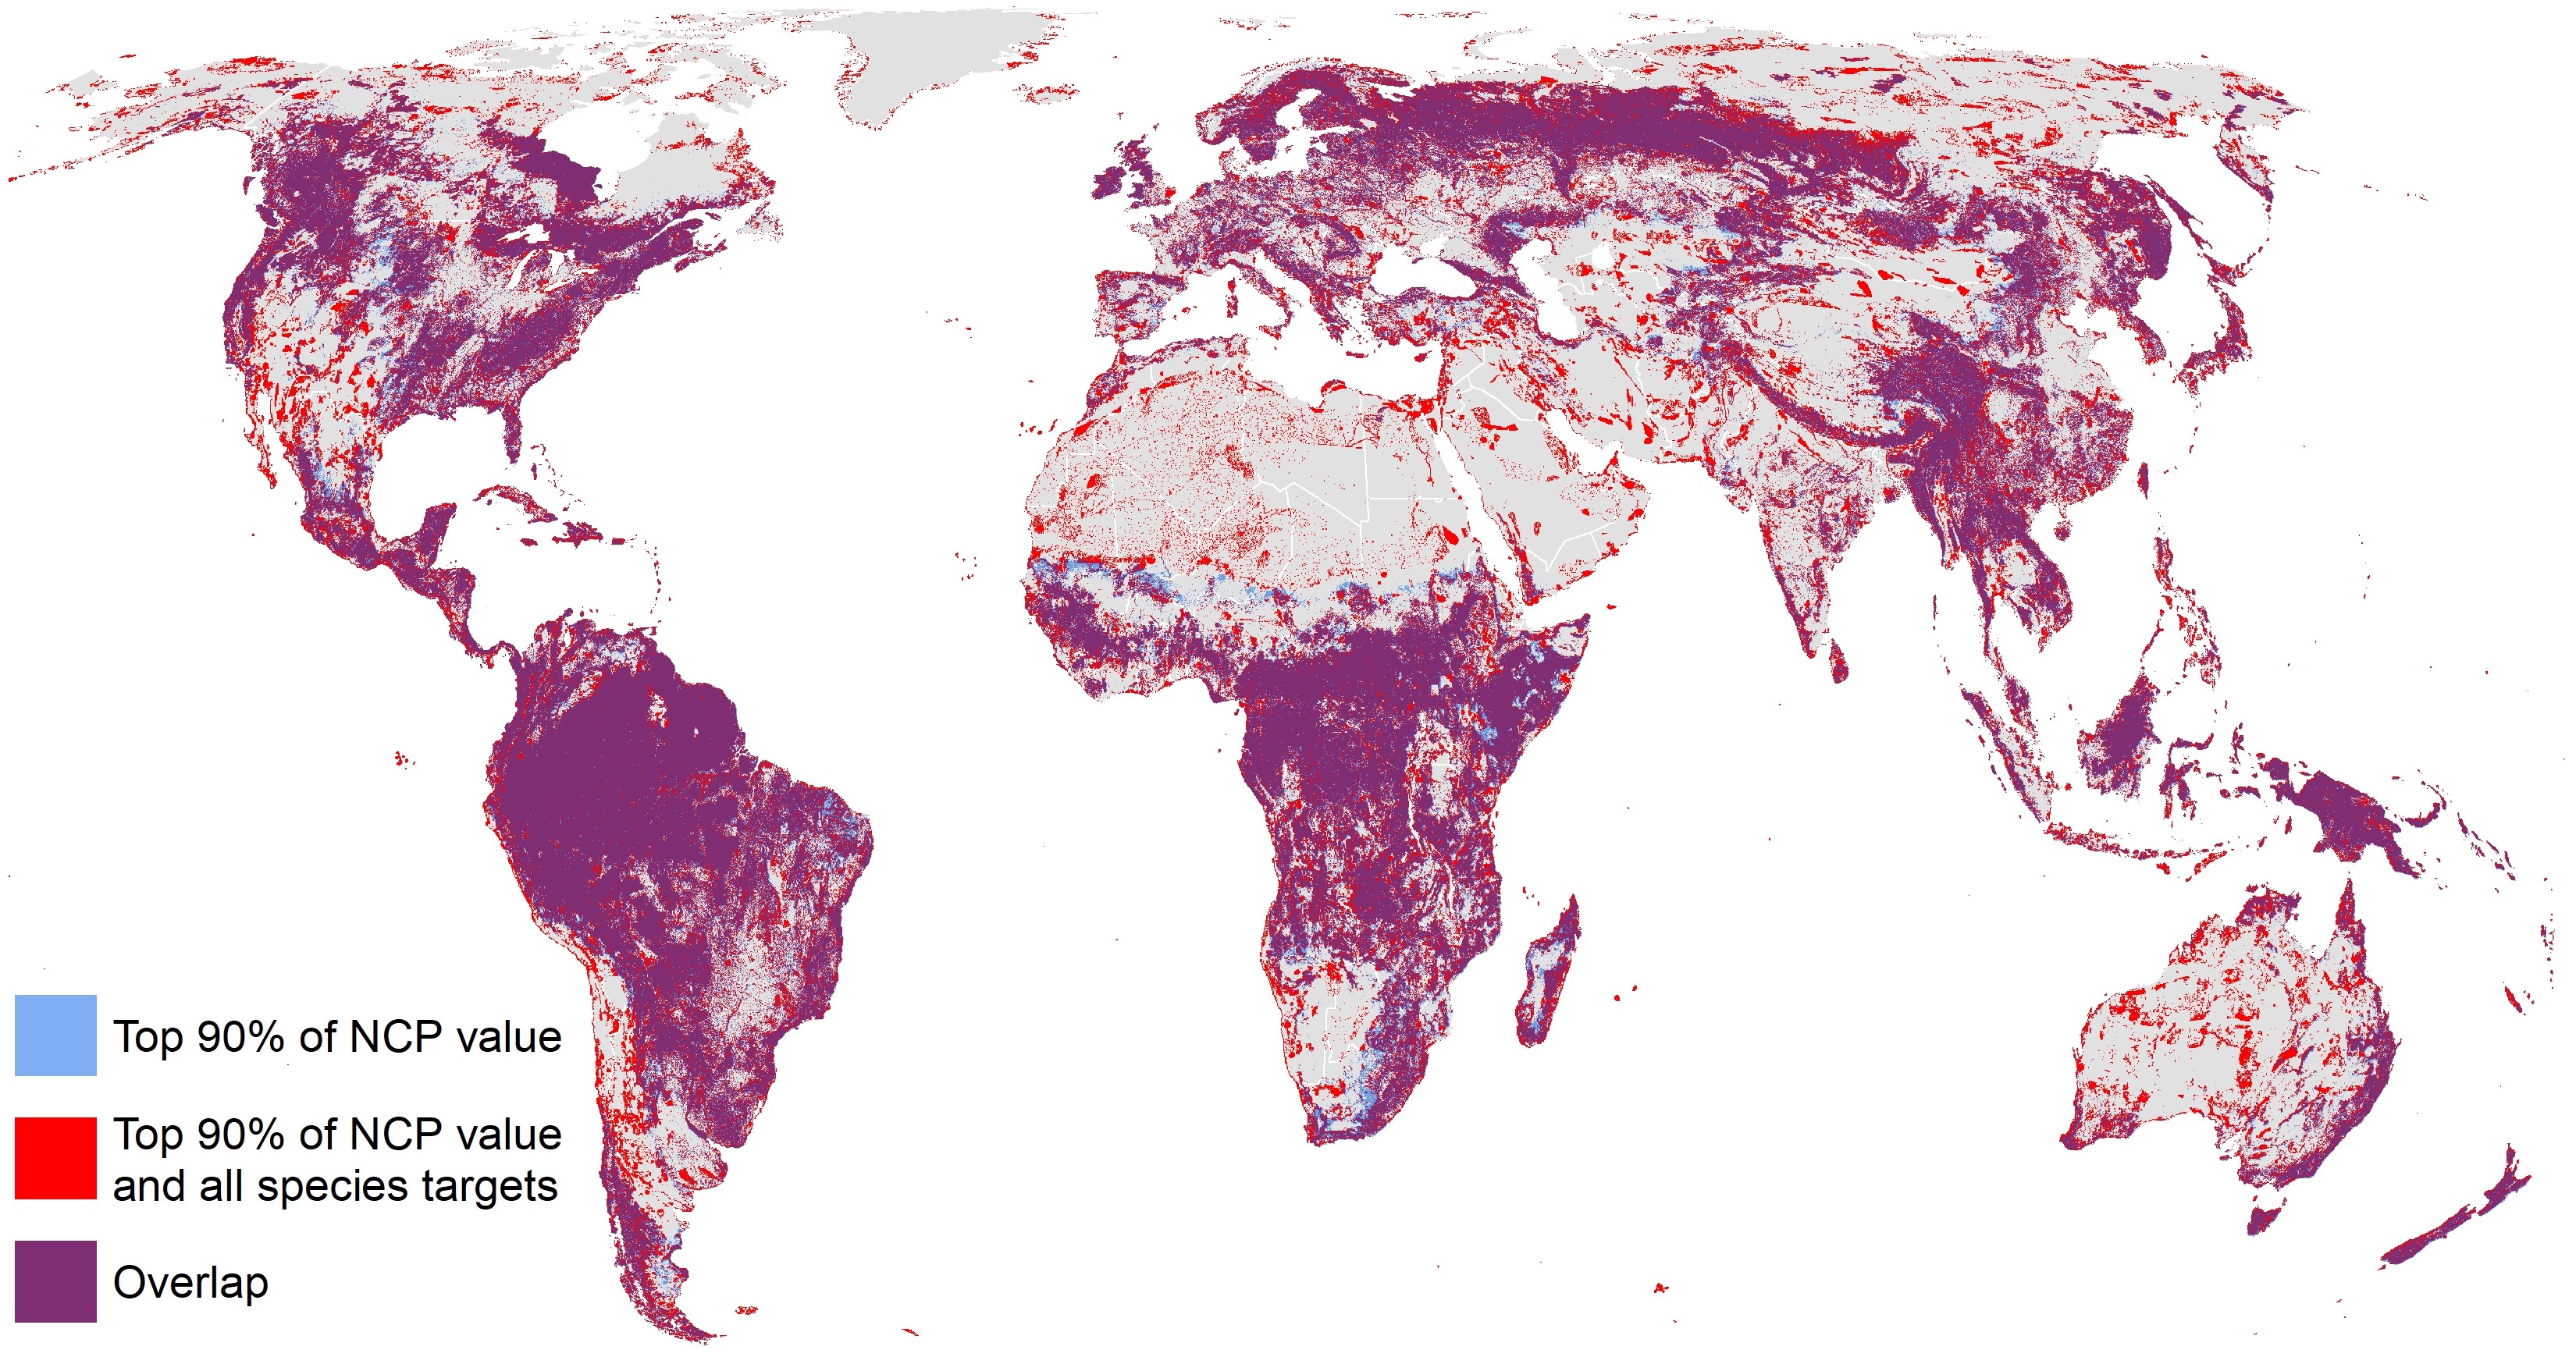 Prioritized areas for nature’s contributions to people (NCP) only (90% of current levels of NCP, in blue), prioritized areas for both NCP (90% of current levels) and that also meet all species targets (red), and areas of overlap (purple). Prioritized areas overlap over 33% of global land area (representing 94% of areas prioritized for NCP alone, or 75% of areas prioritized for NCP and species).